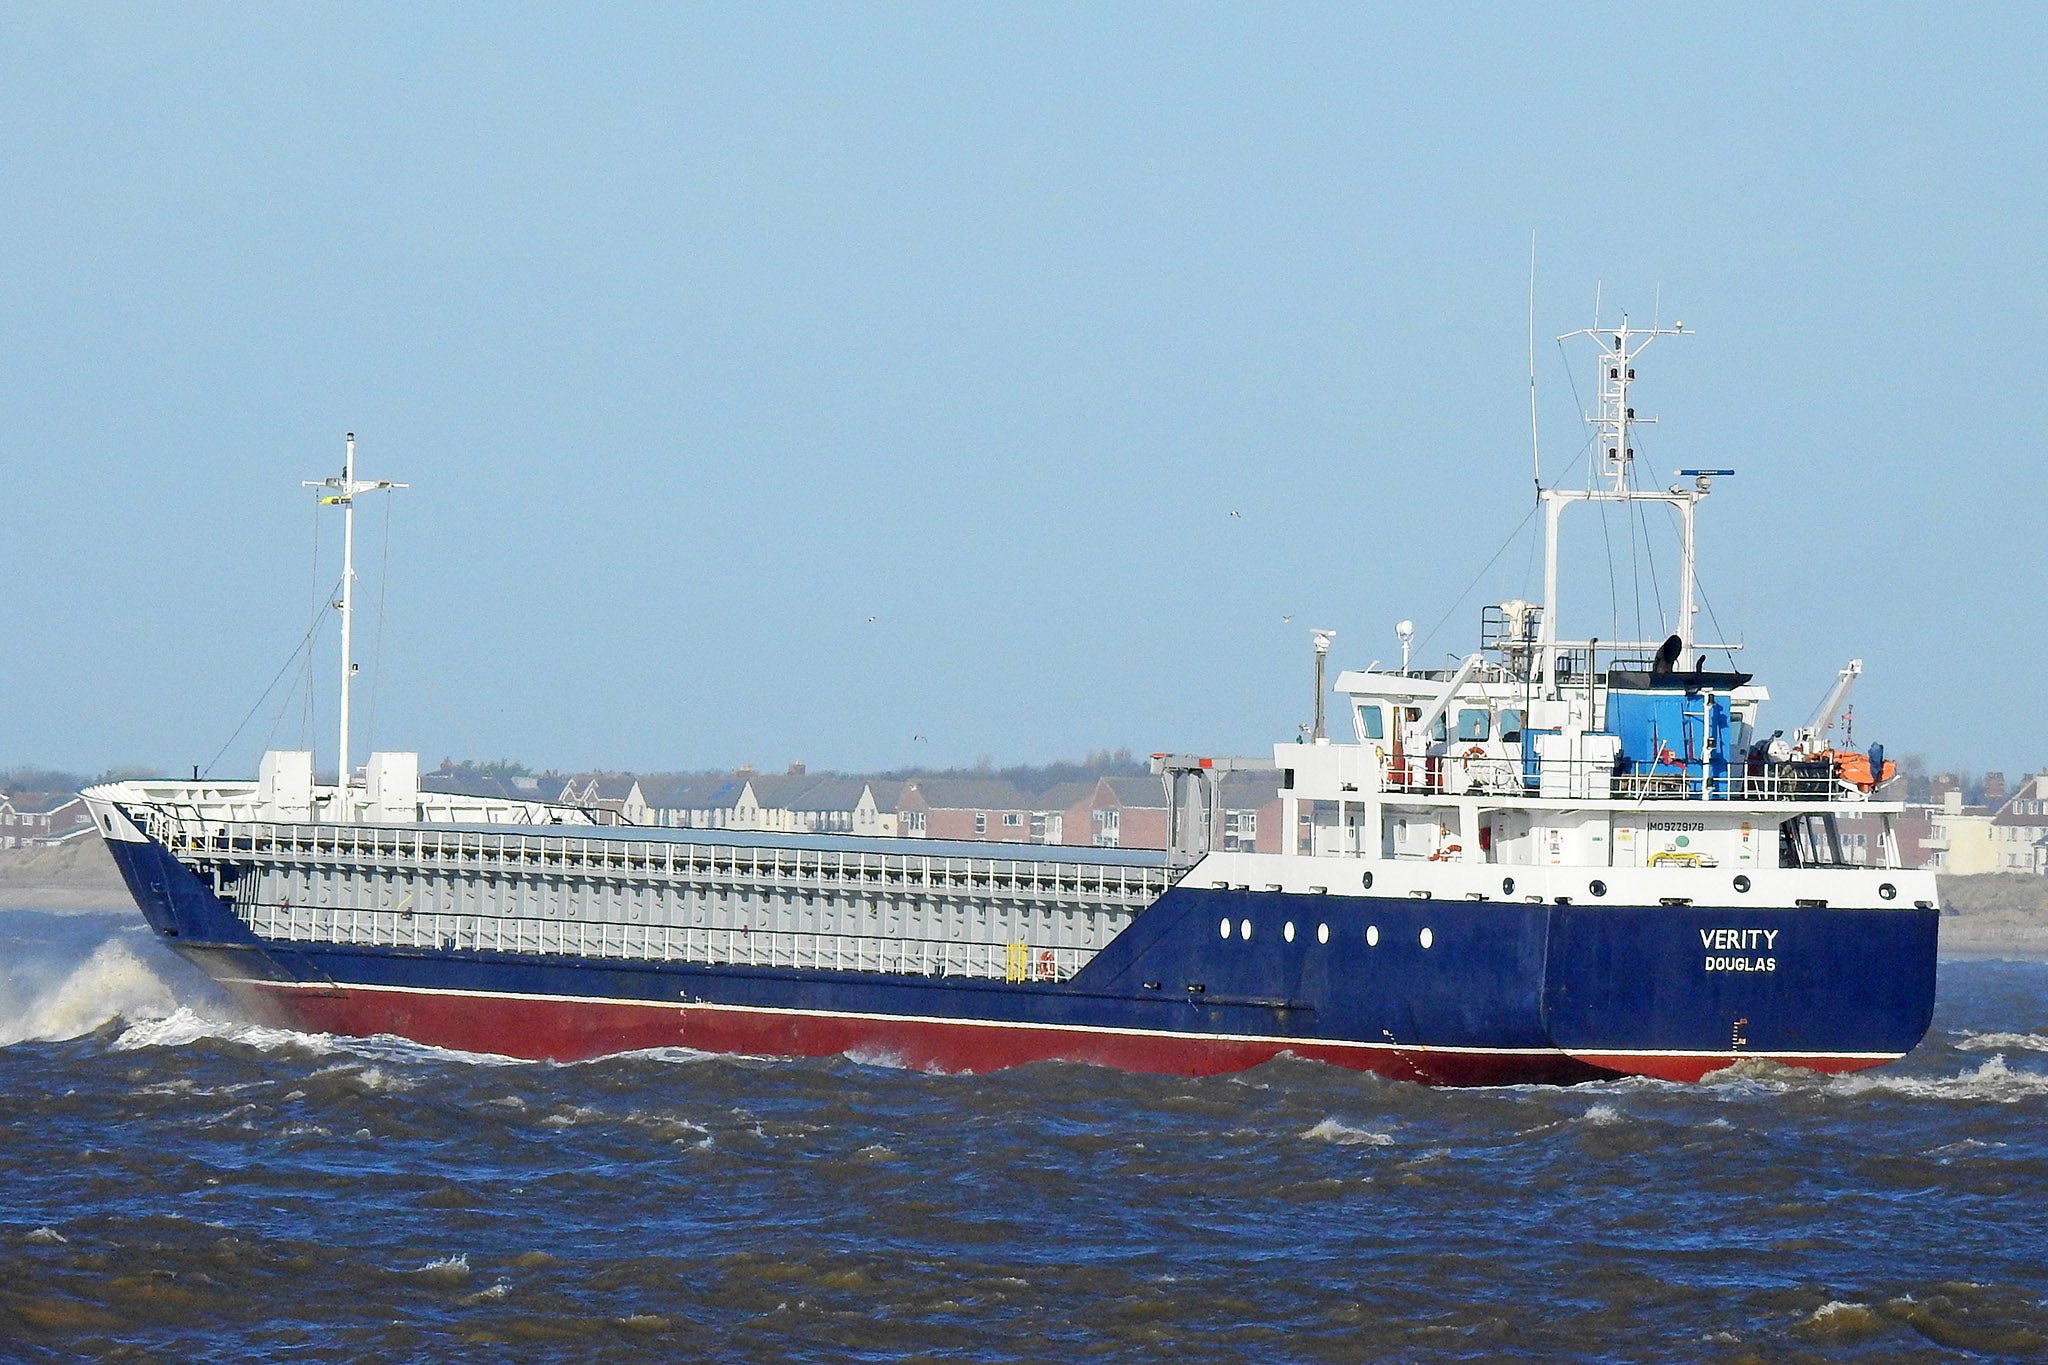 The Verity and Polesie collided in the early hours of Tuesday roughly 14 miles off the coast of Heligoland.